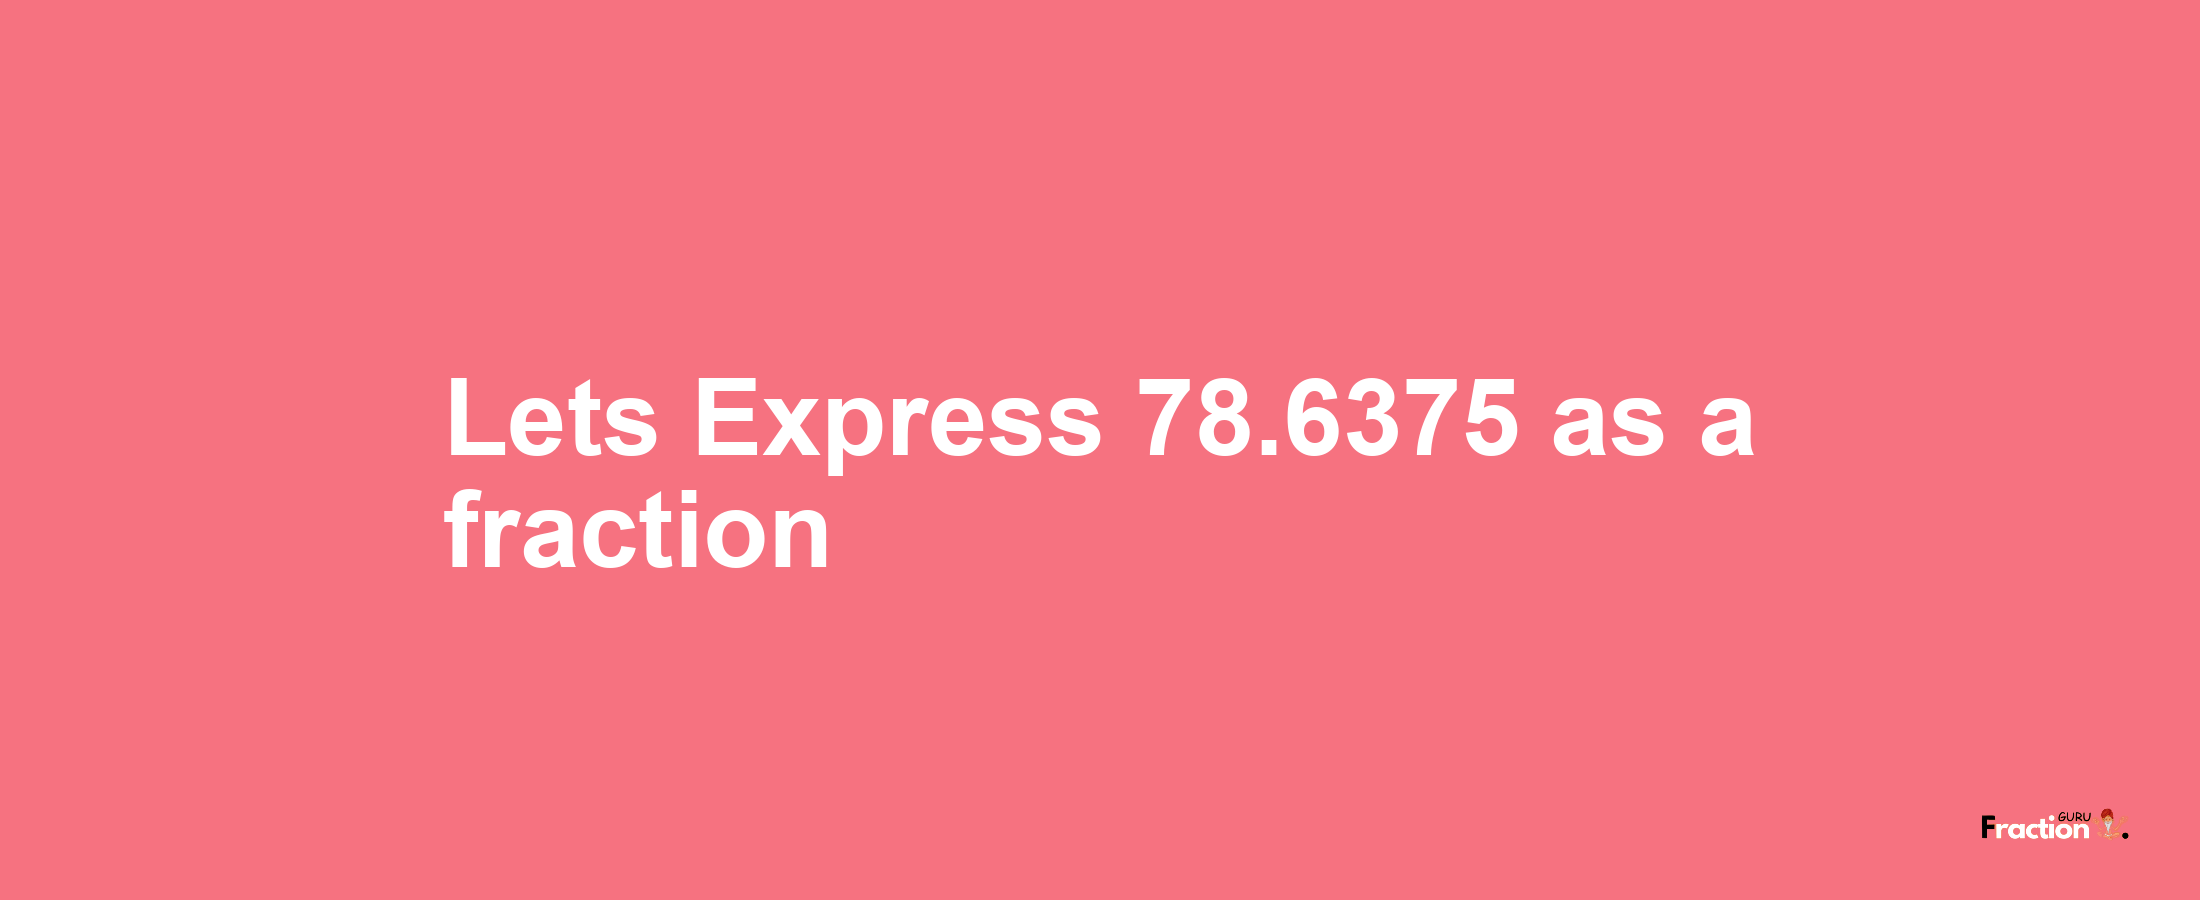 Lets Express 78.6375 as afraction